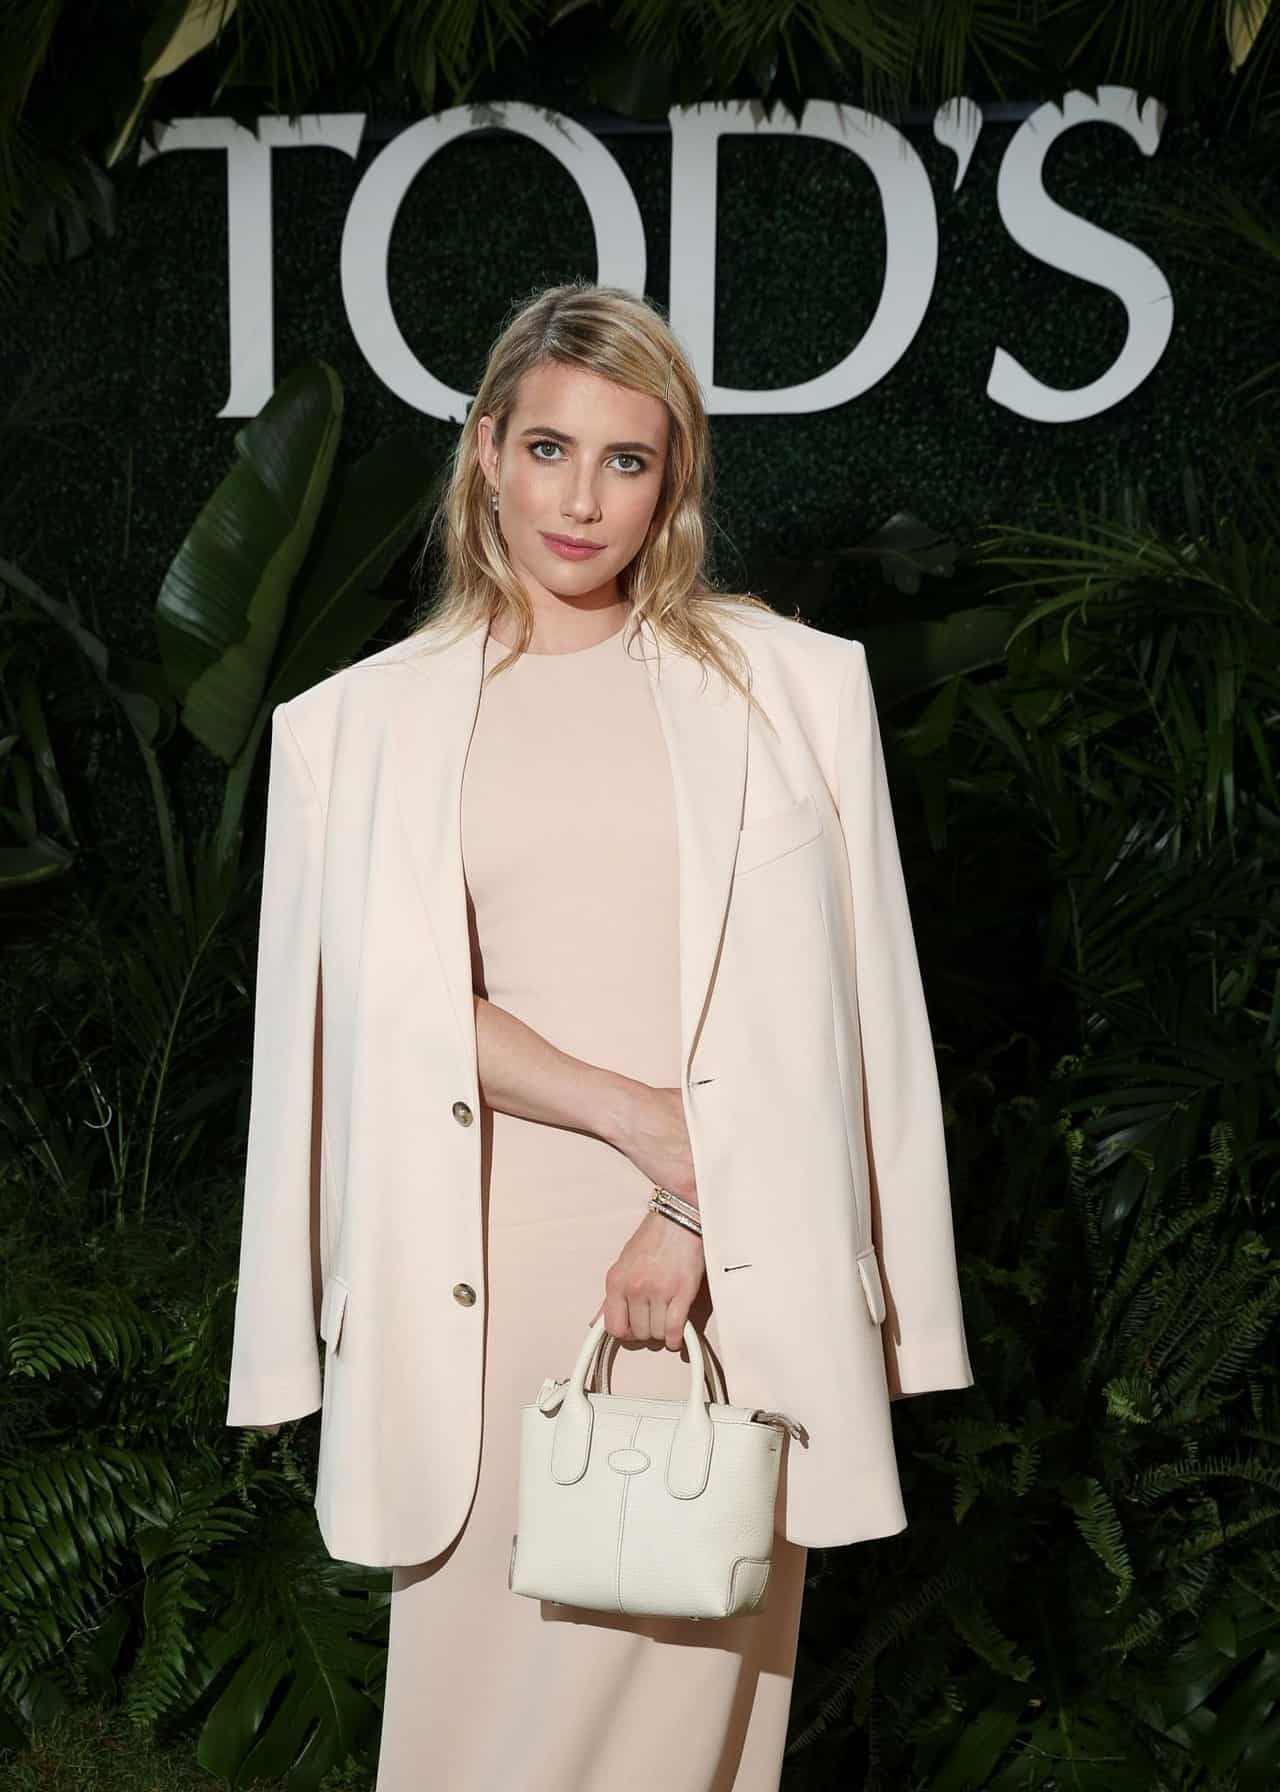 Emma Roberts Embraces Summer in Chic Maxi Dress at Tod's Hampton Event